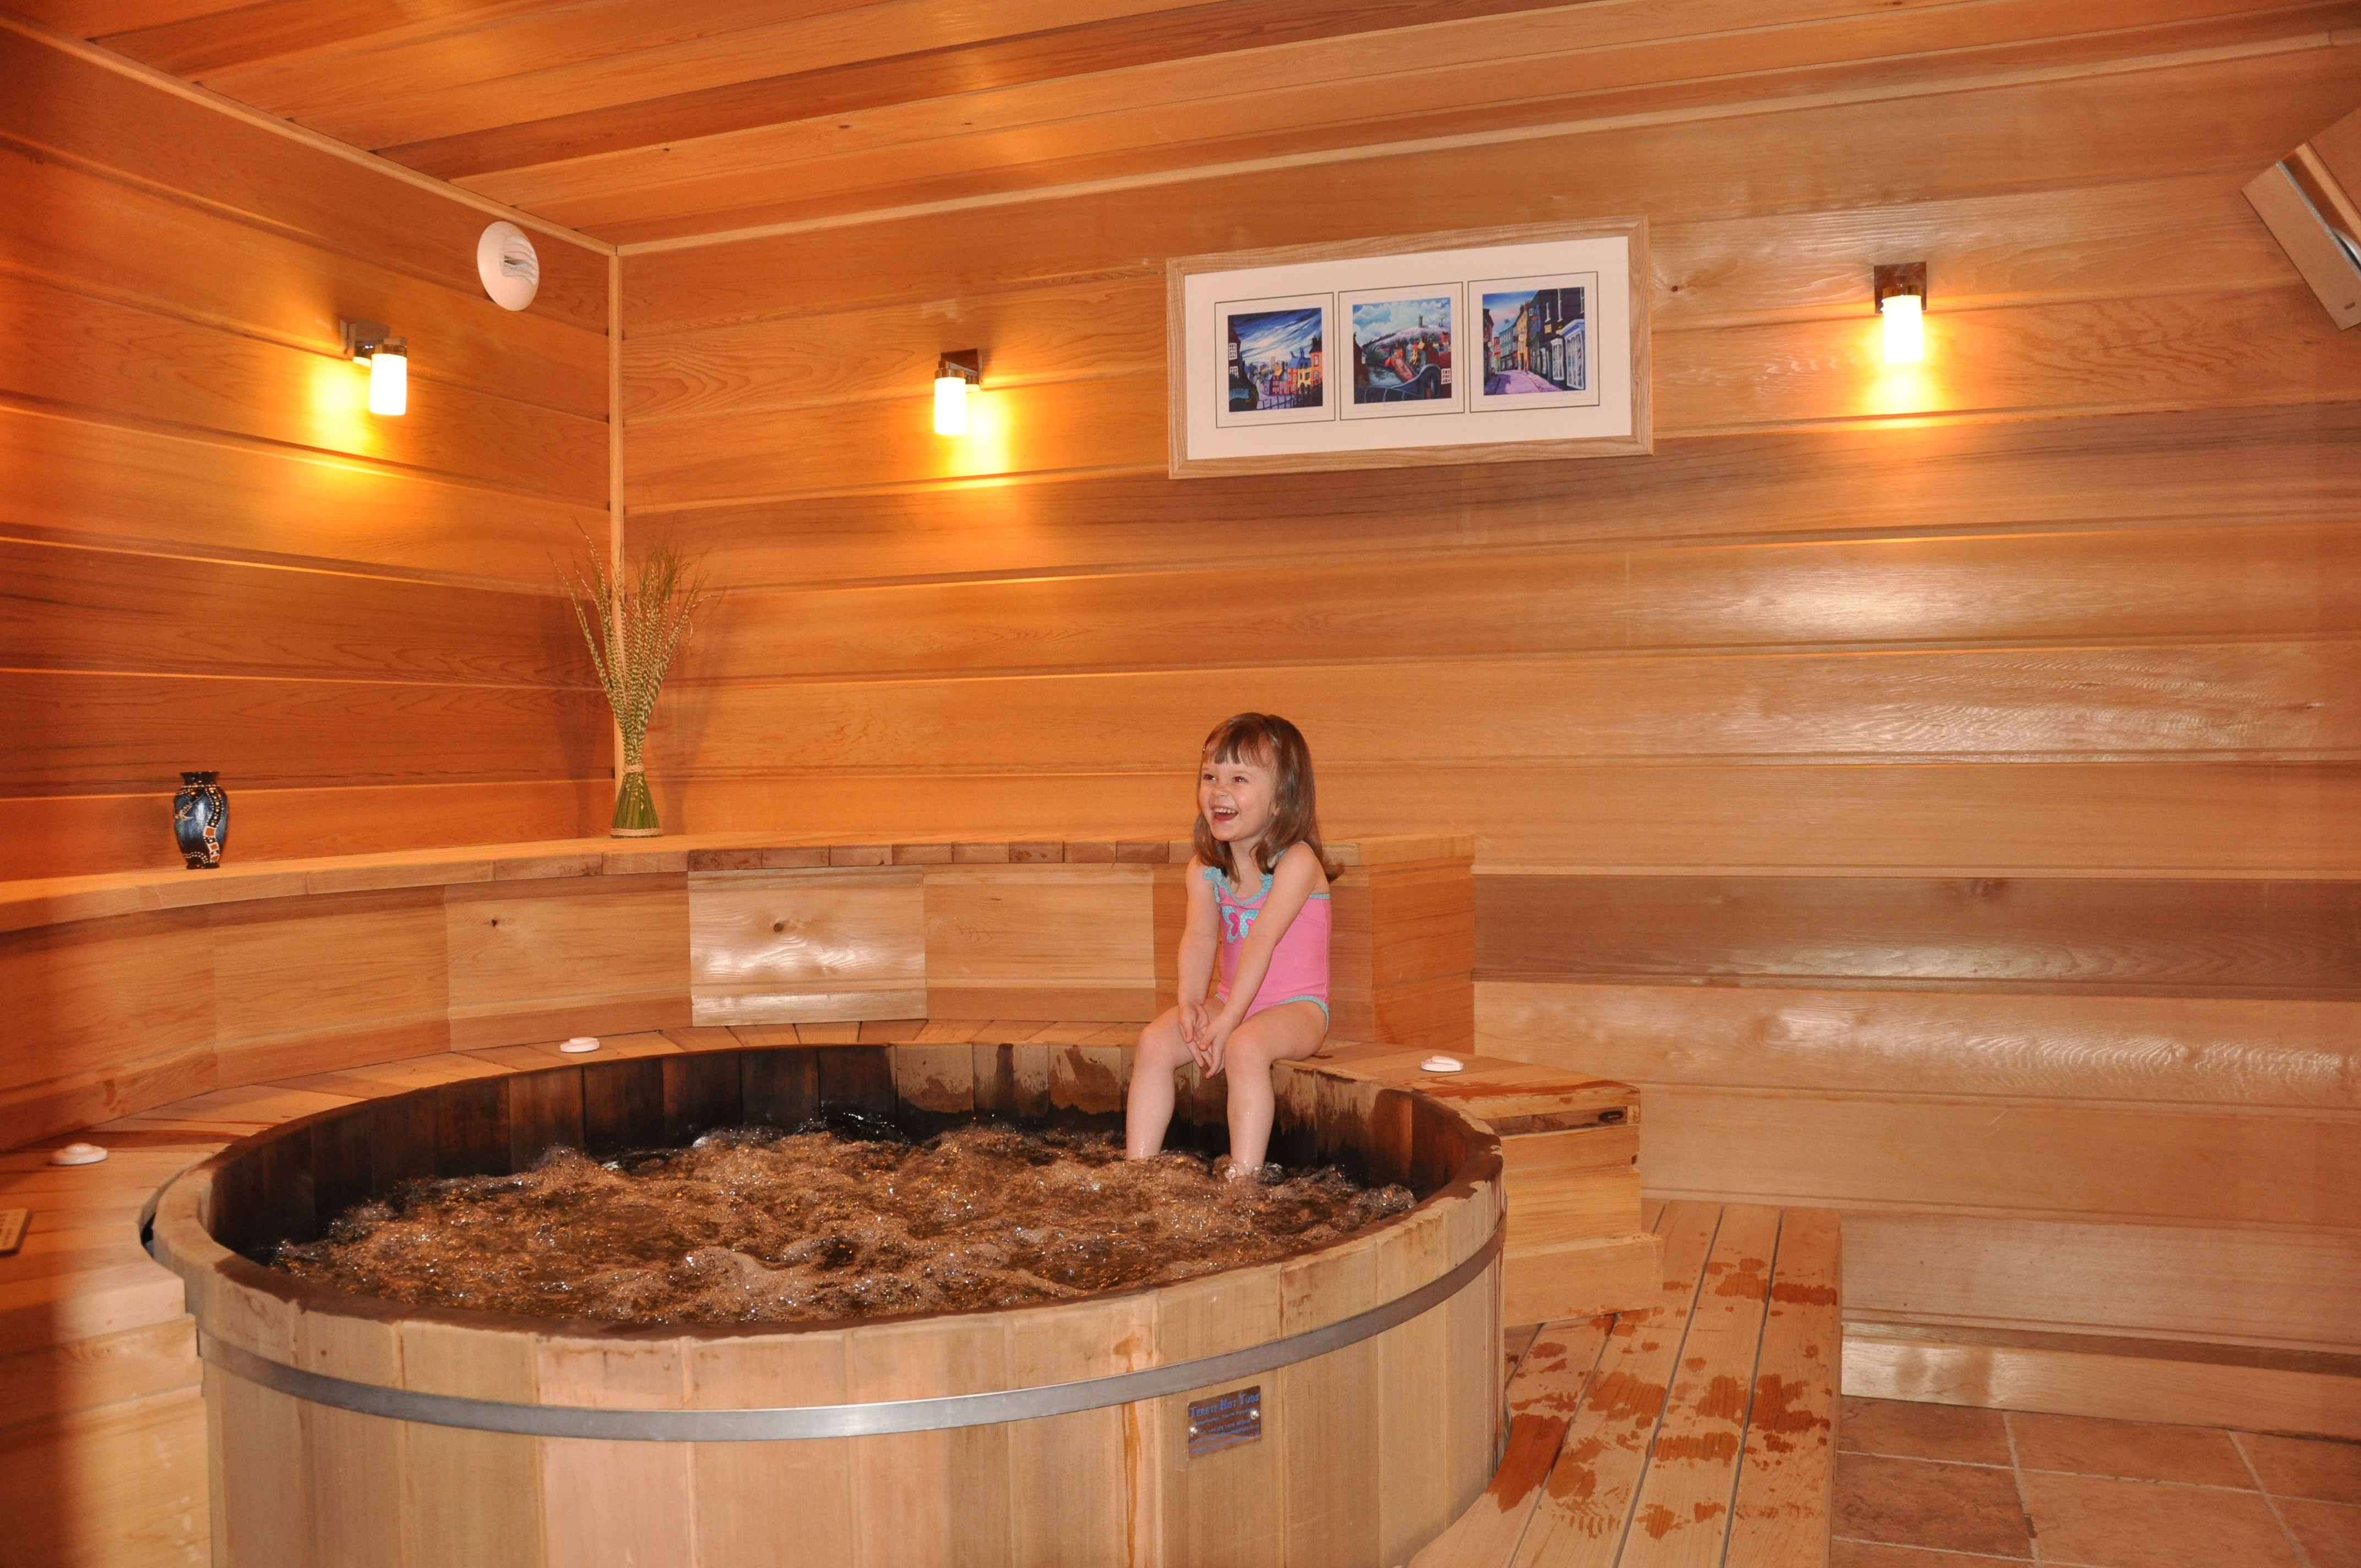 Wooden Hot Tub Gallery Terete Hot Tubs